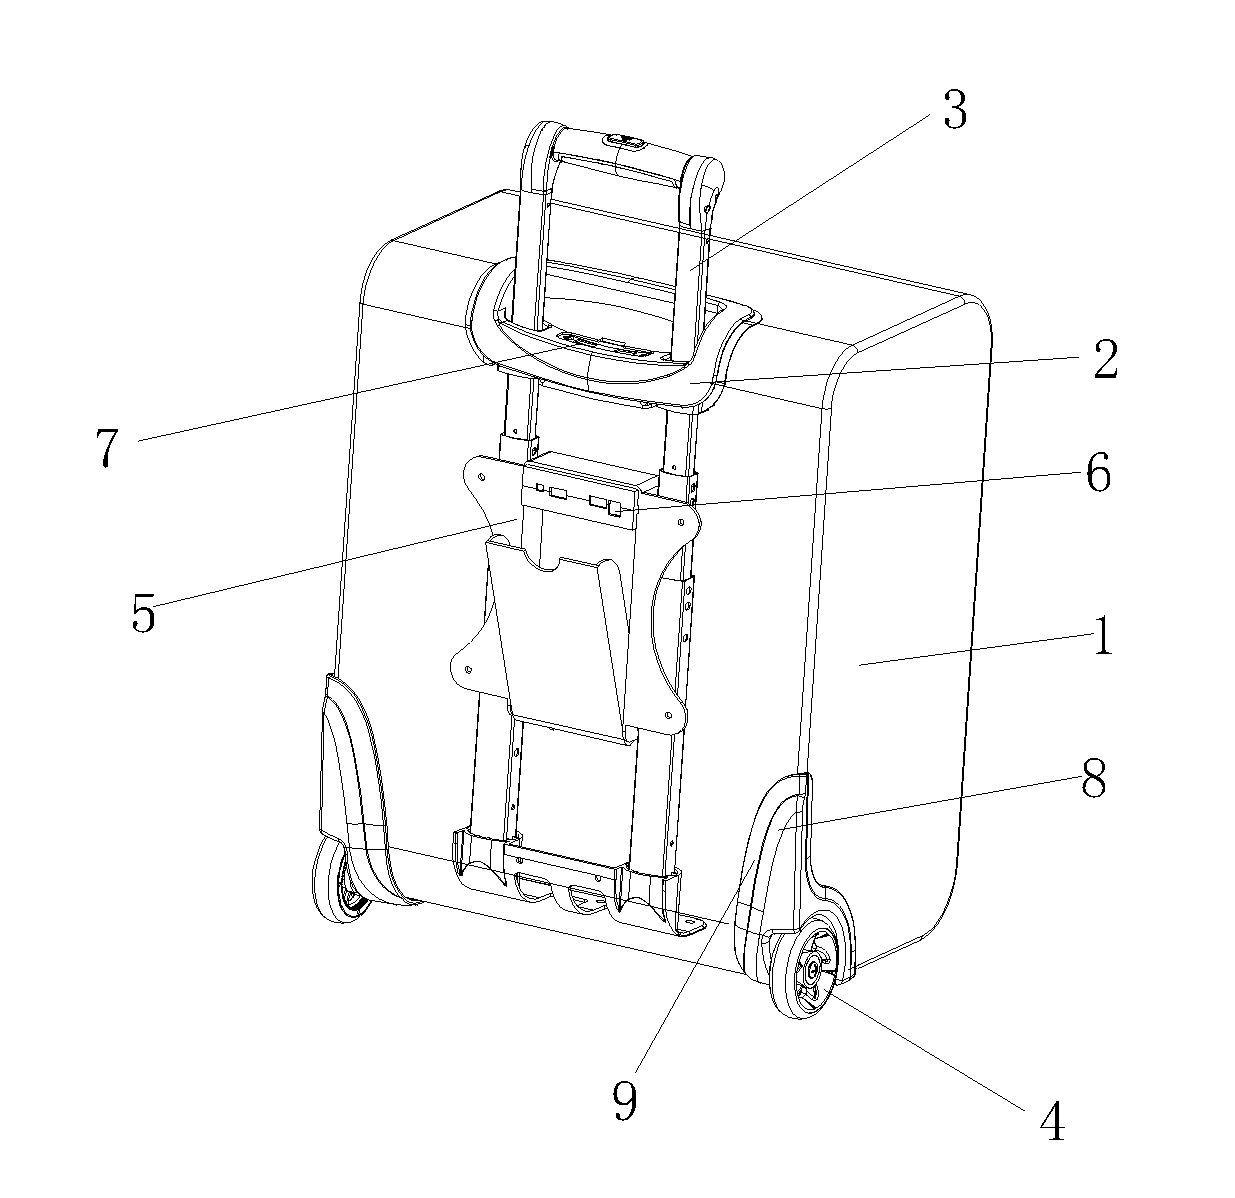 Luggage case with a power device